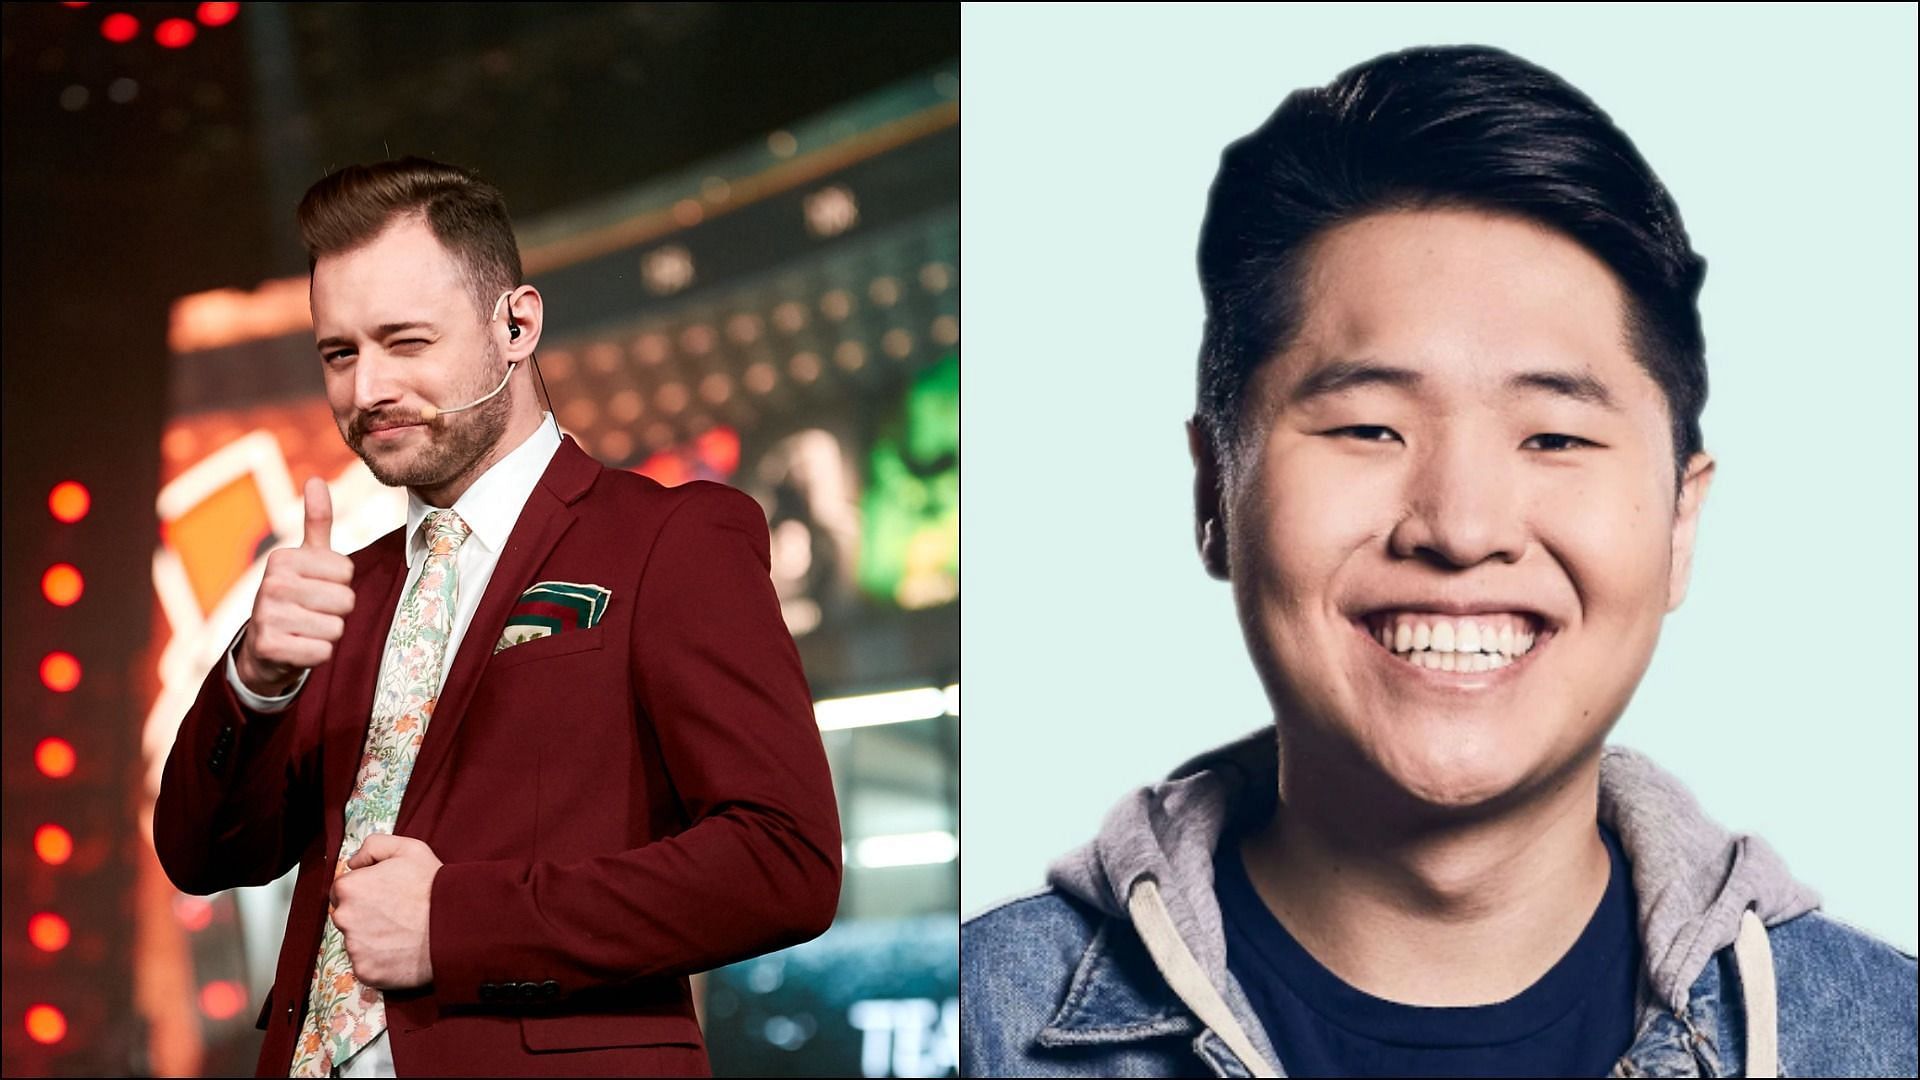 Rich Campbell (Pictured Left) shoots back at Disguised Toast for calling him &quot;Some guy&quot; on stream (Image via Sportskeeda)